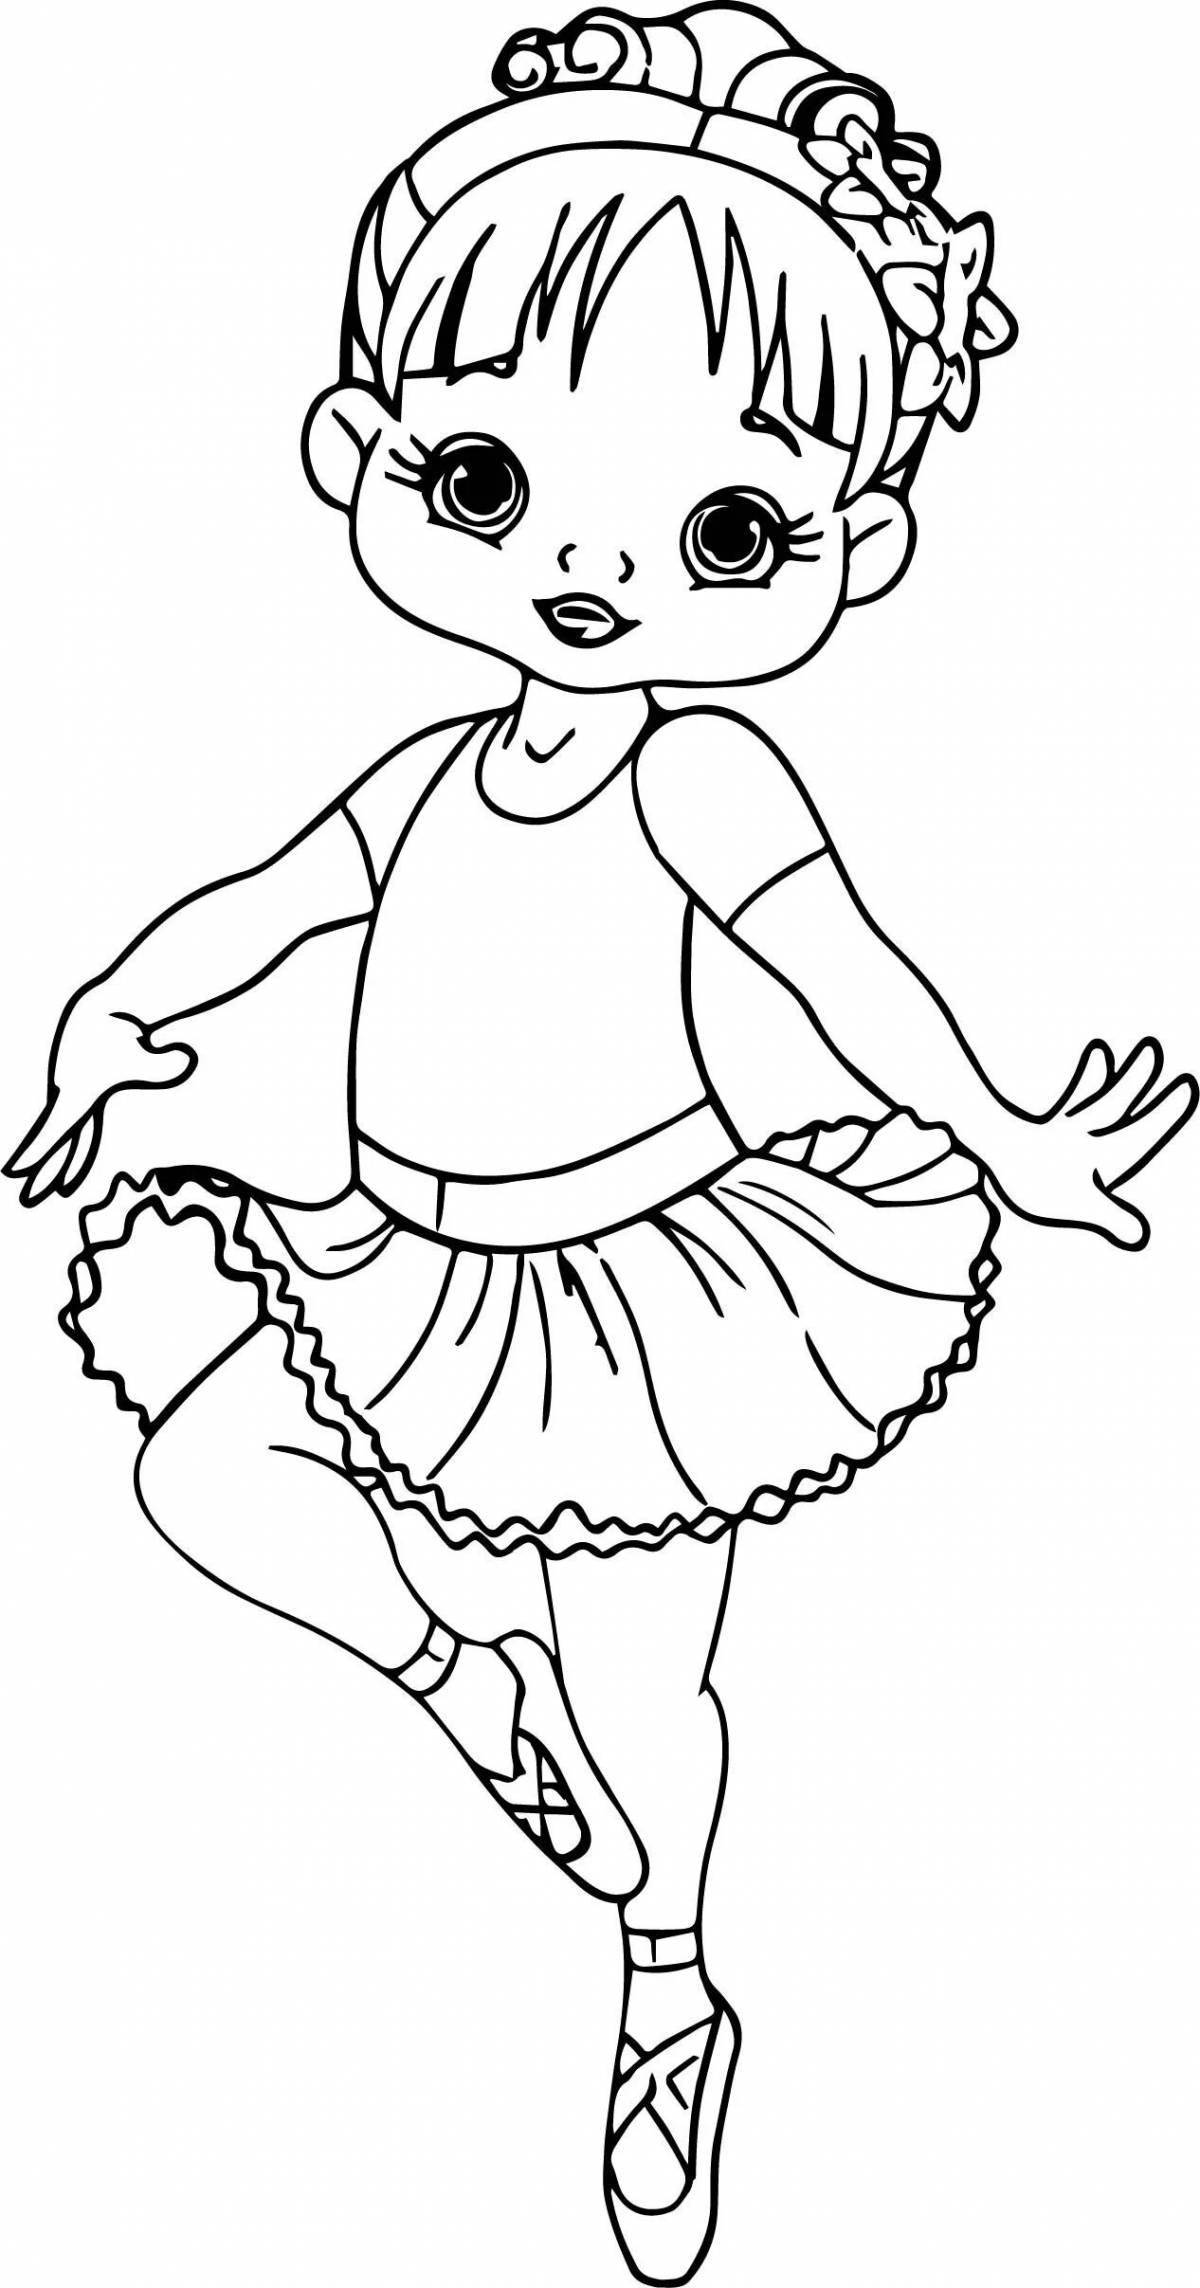 Glowing dancing coloring pages for kids